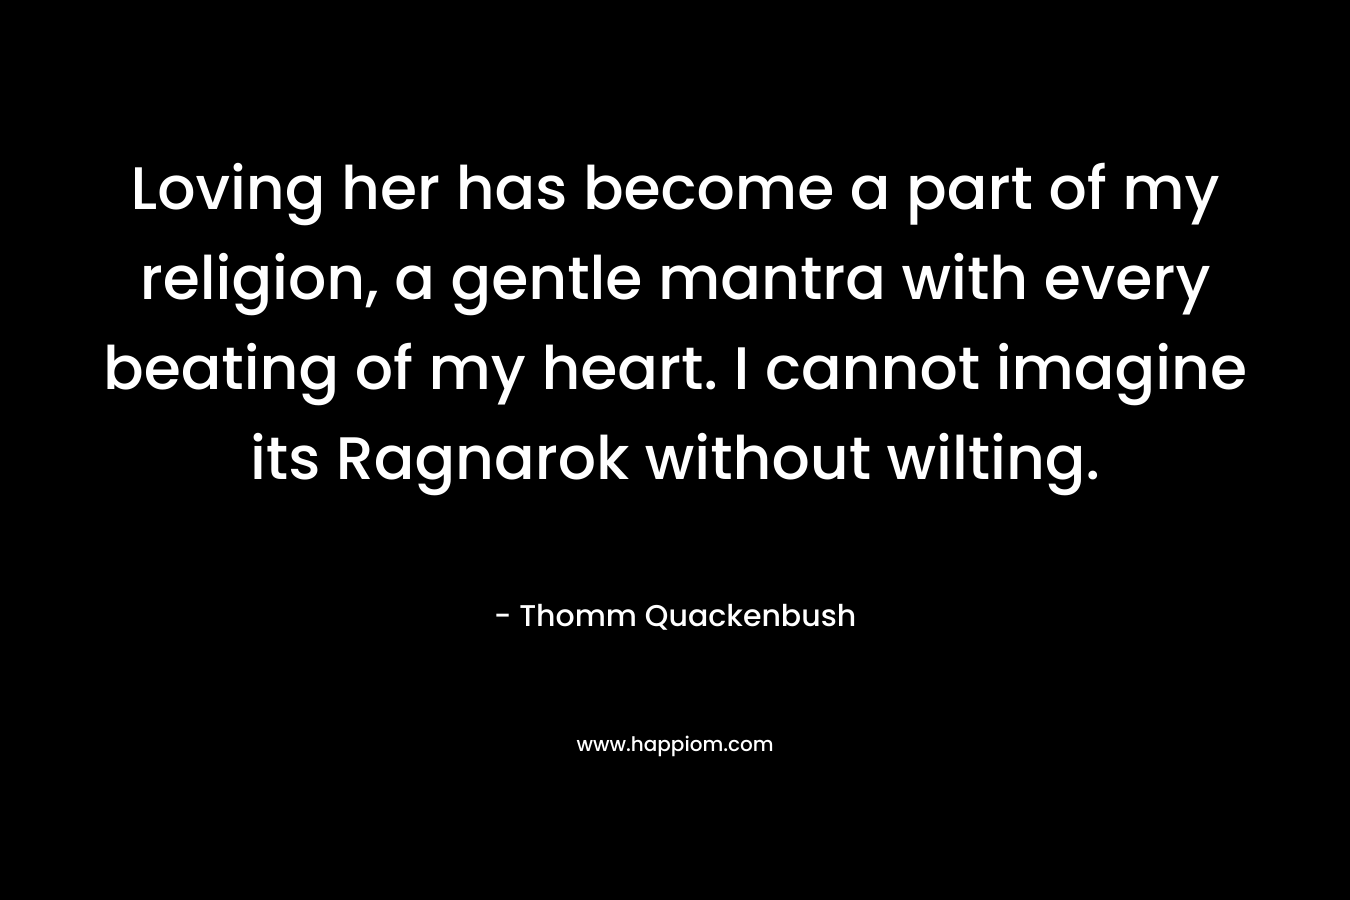 Loving her has become a part of my religion, a gentle mantra with every beating of my heart. I cannot imagine its Ragnarok without wilting. – Thomm Quackenbush